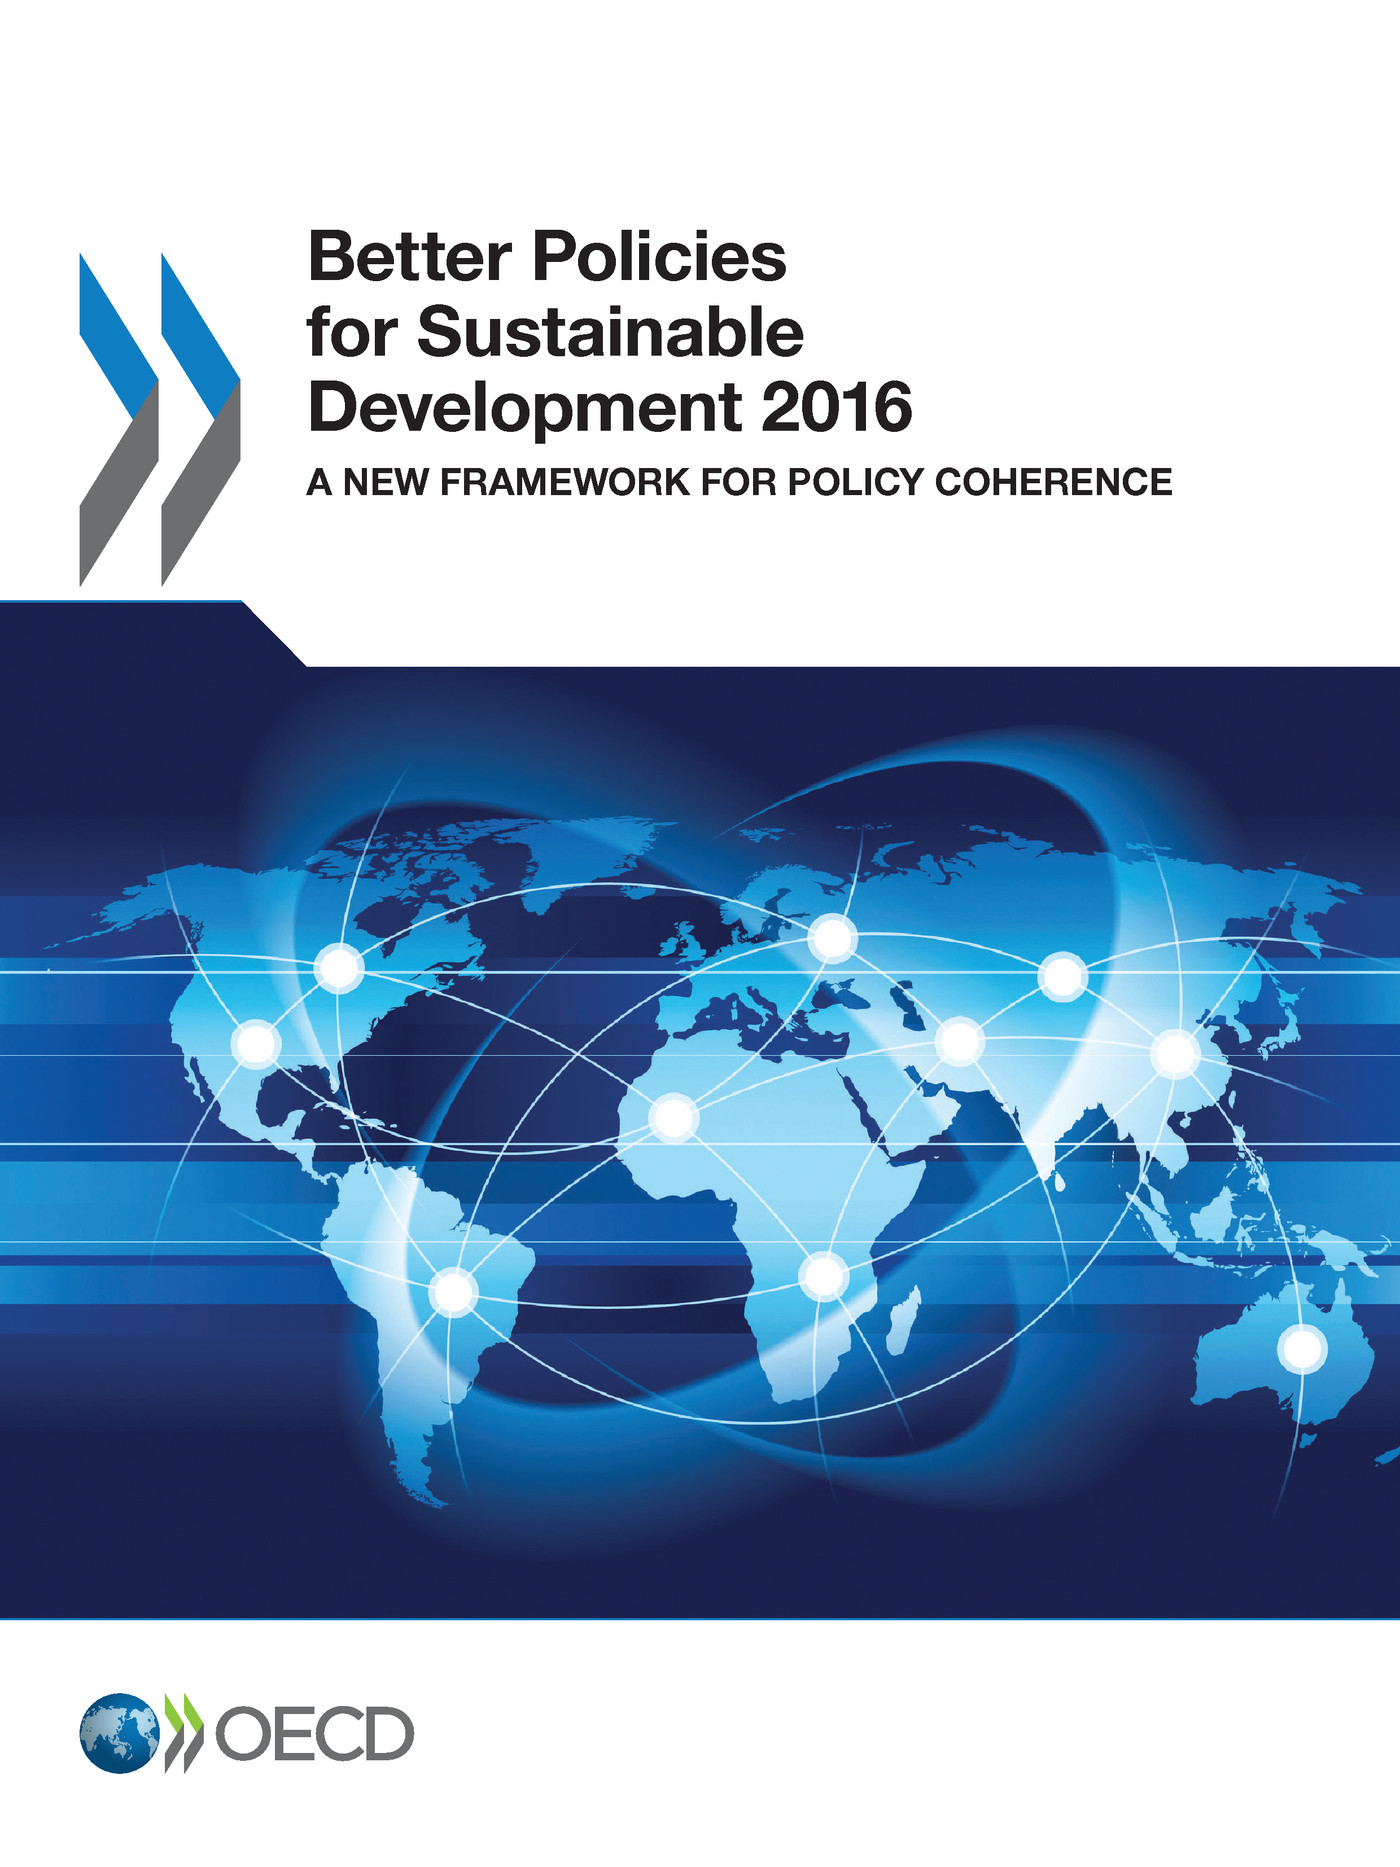 Better Policies for Sustainable Development 2016 -  Collectif - OCDE / OECD